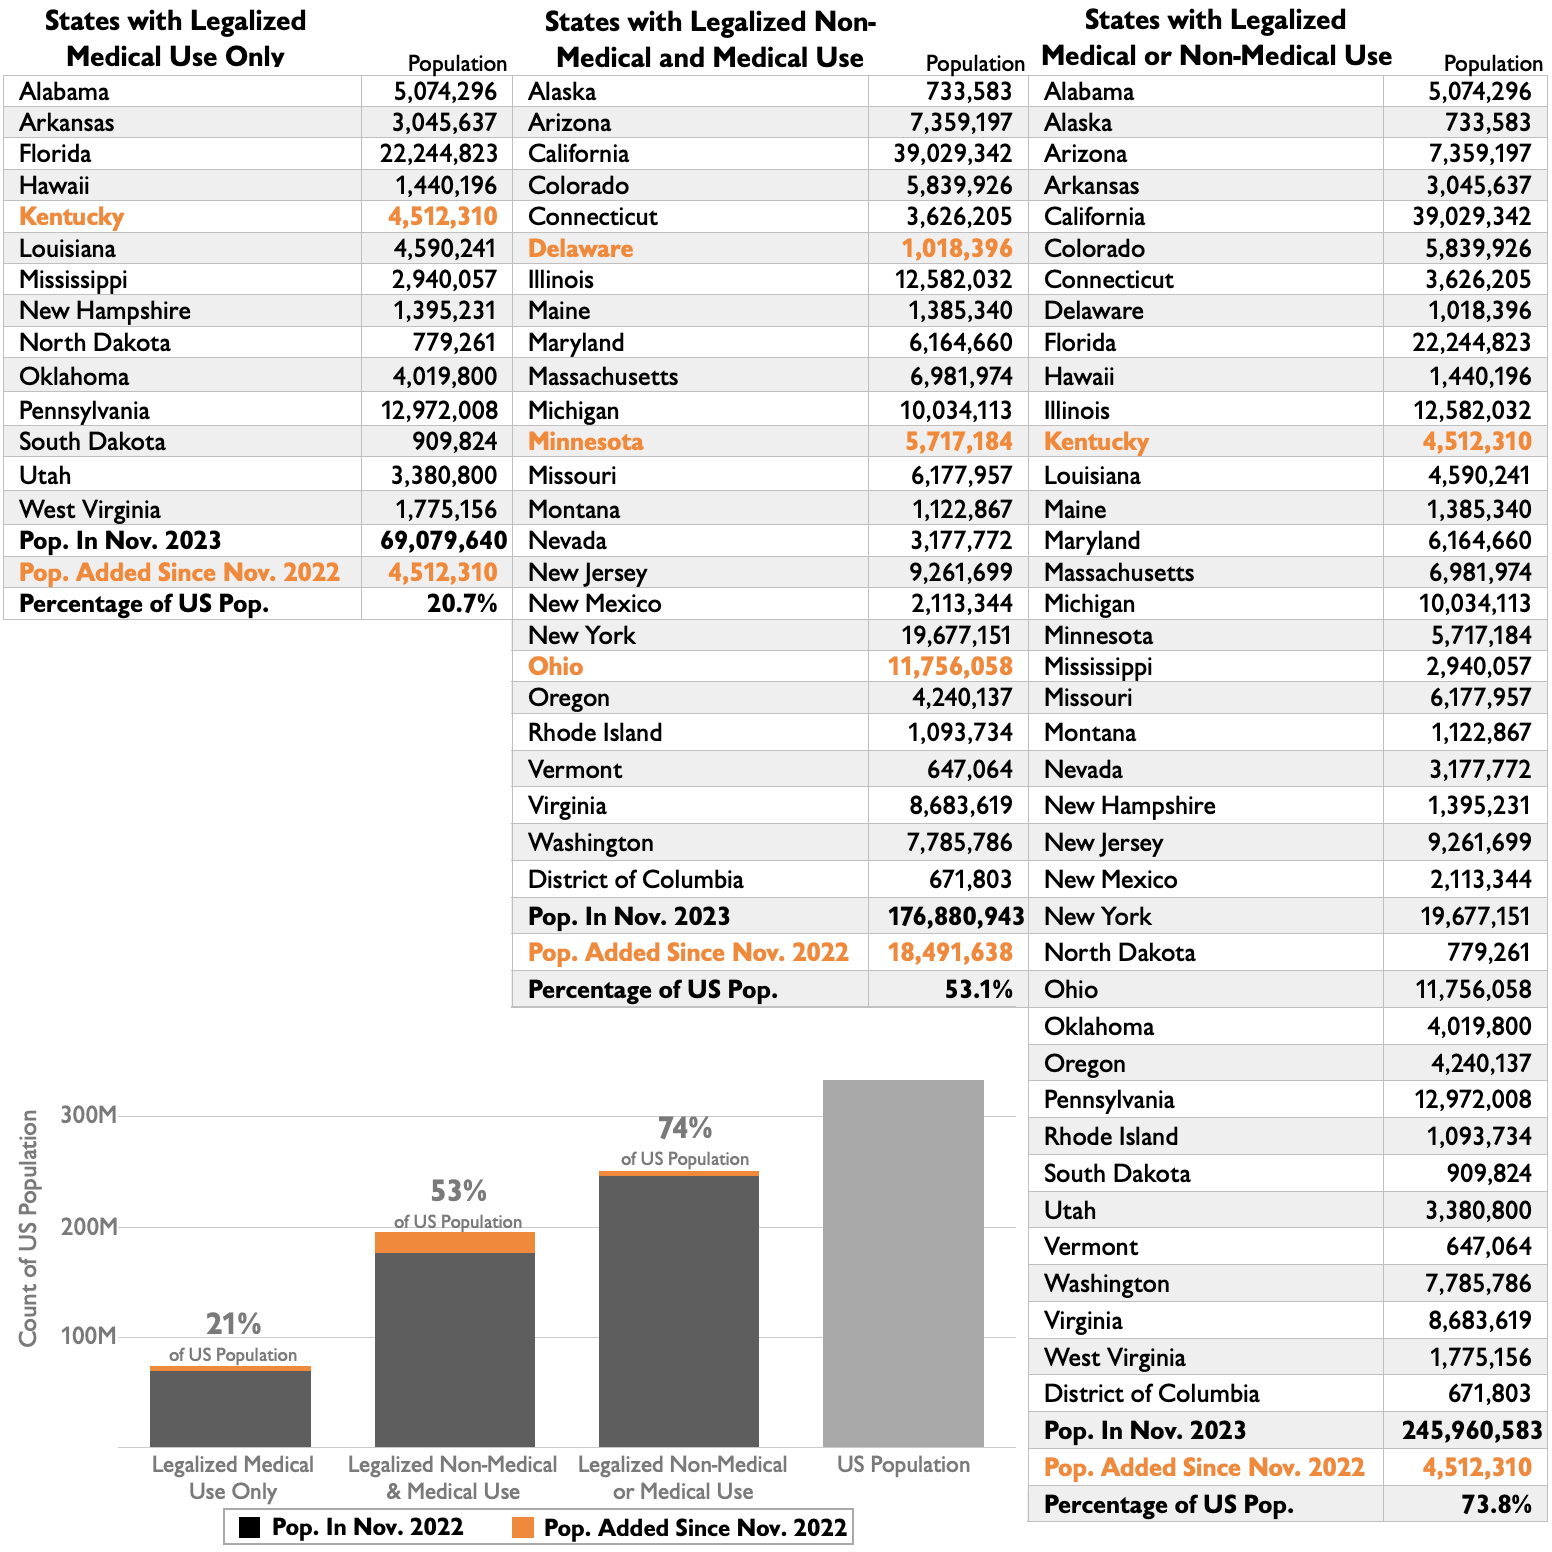 Table - States and Population with Legalized Use - November 2023